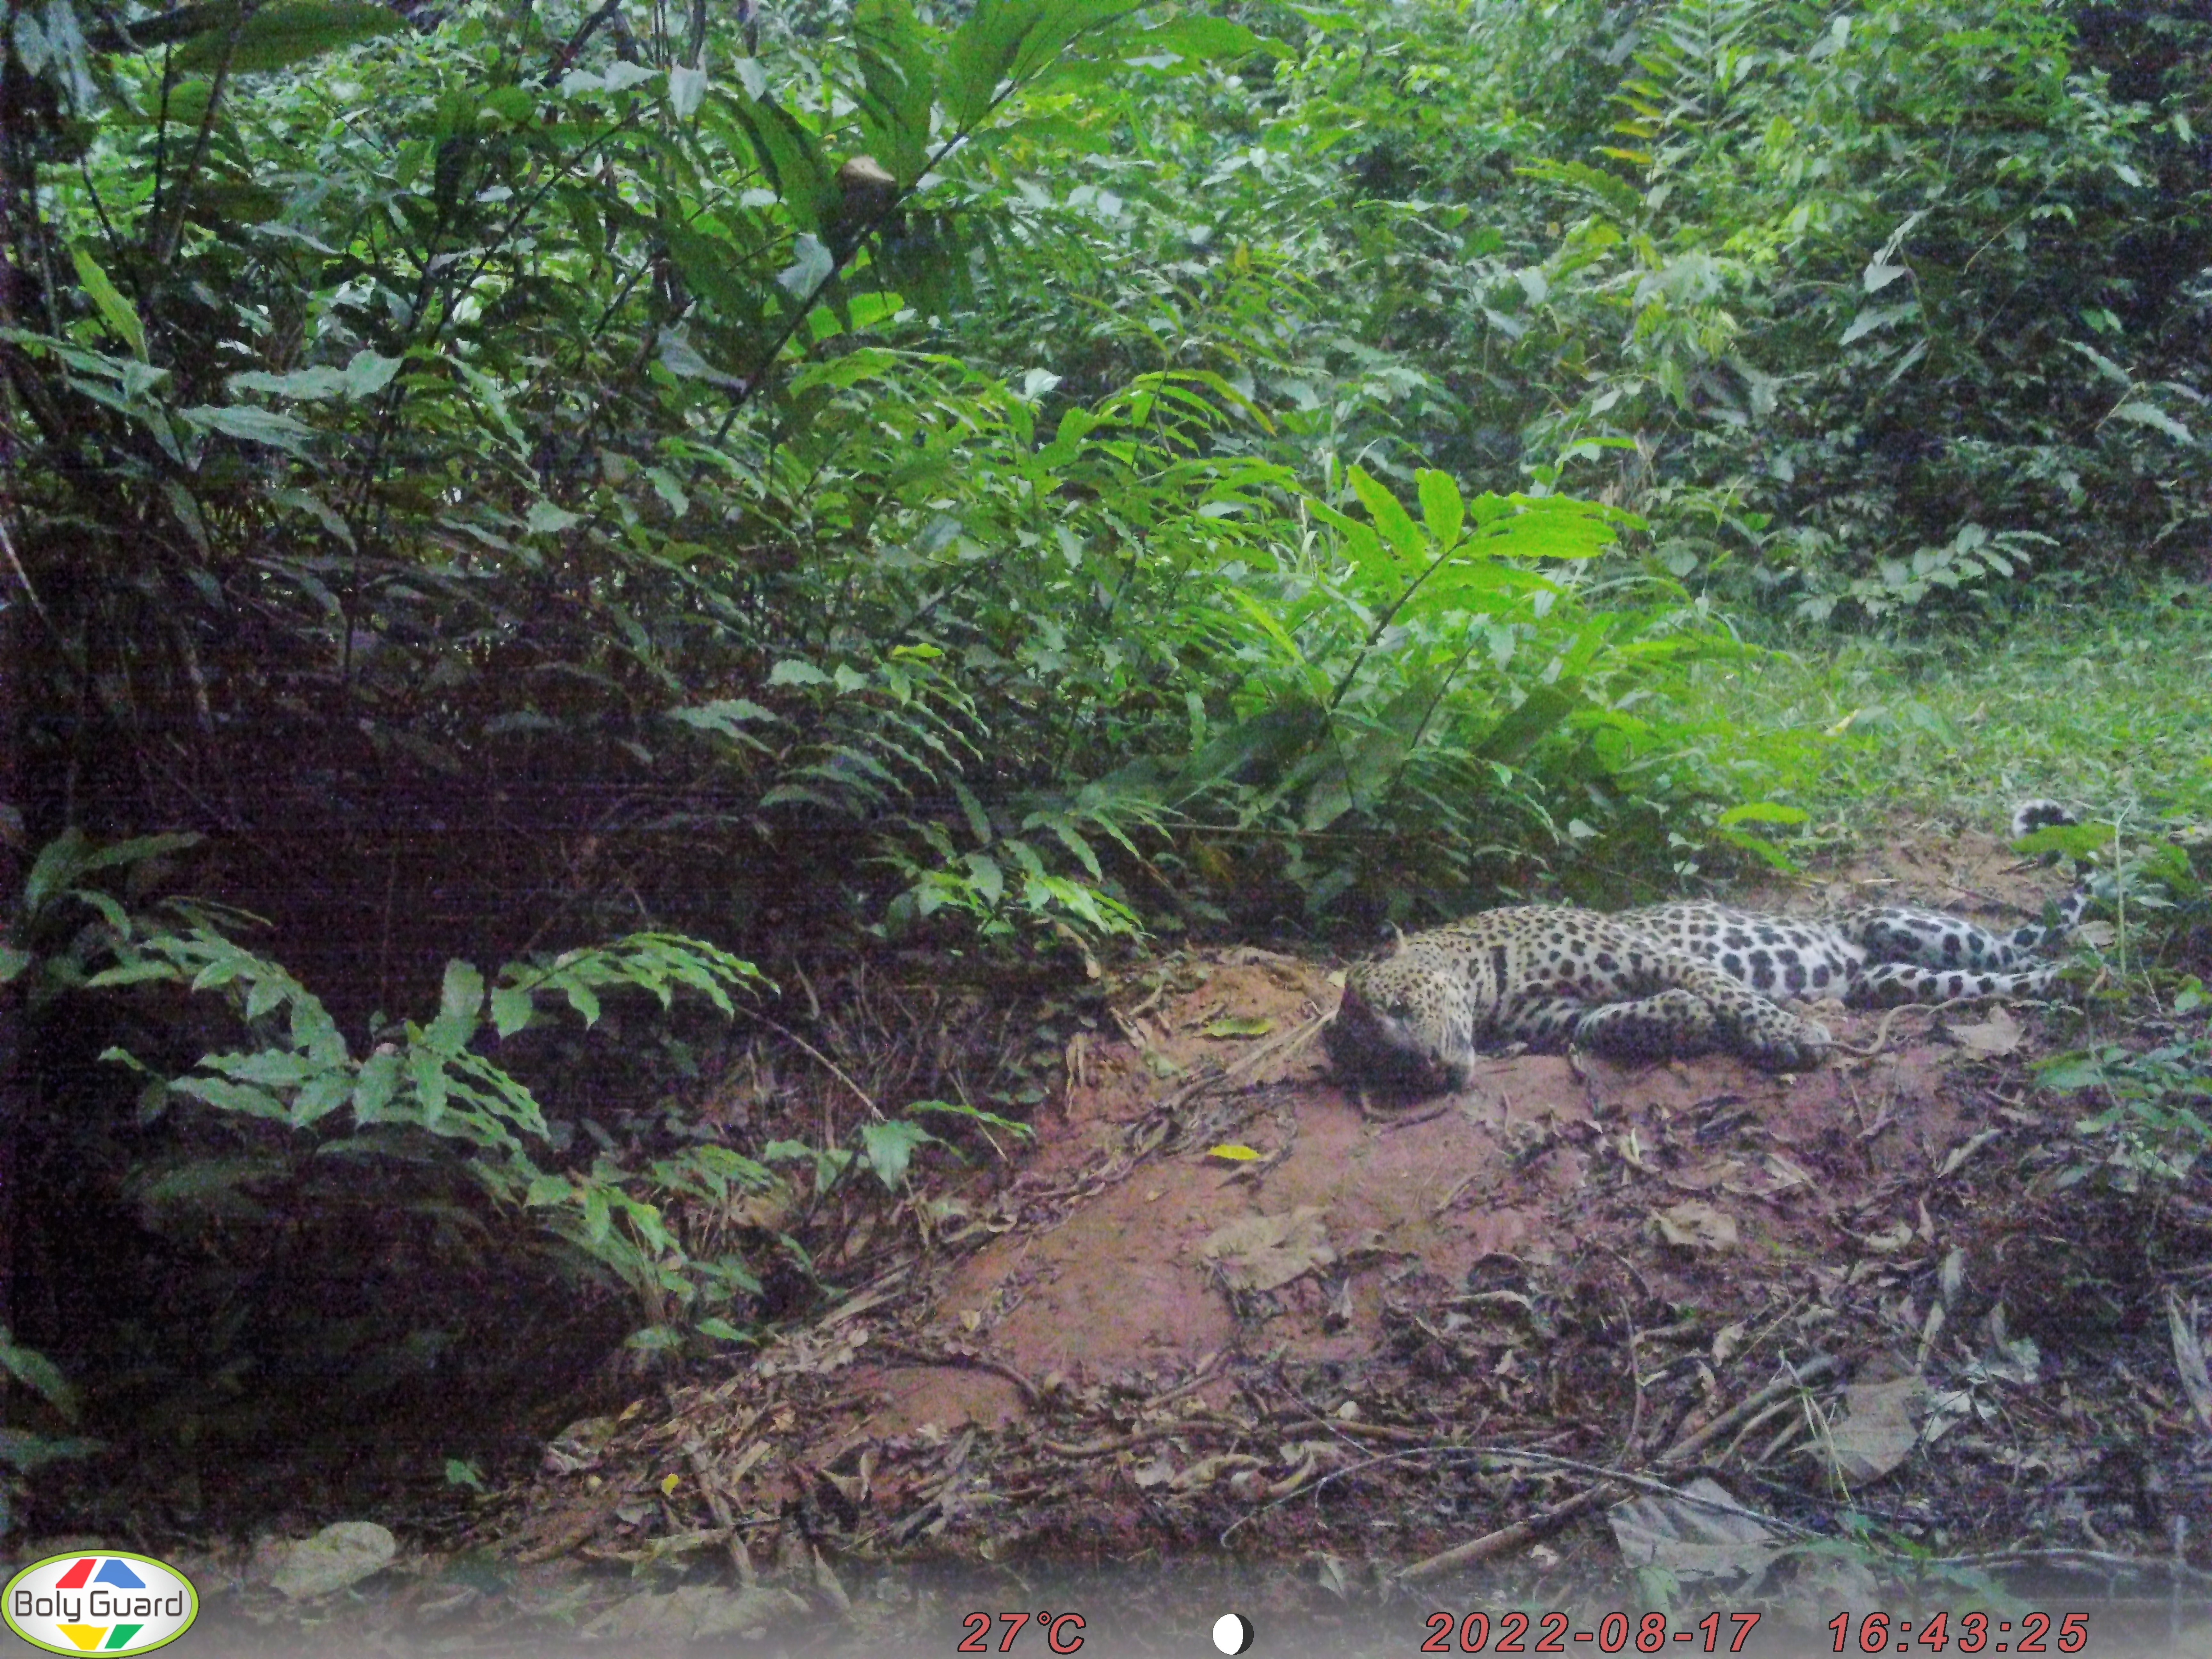 A LEOPARD RESTING IN FRONT OF THE CAMERA TRAP